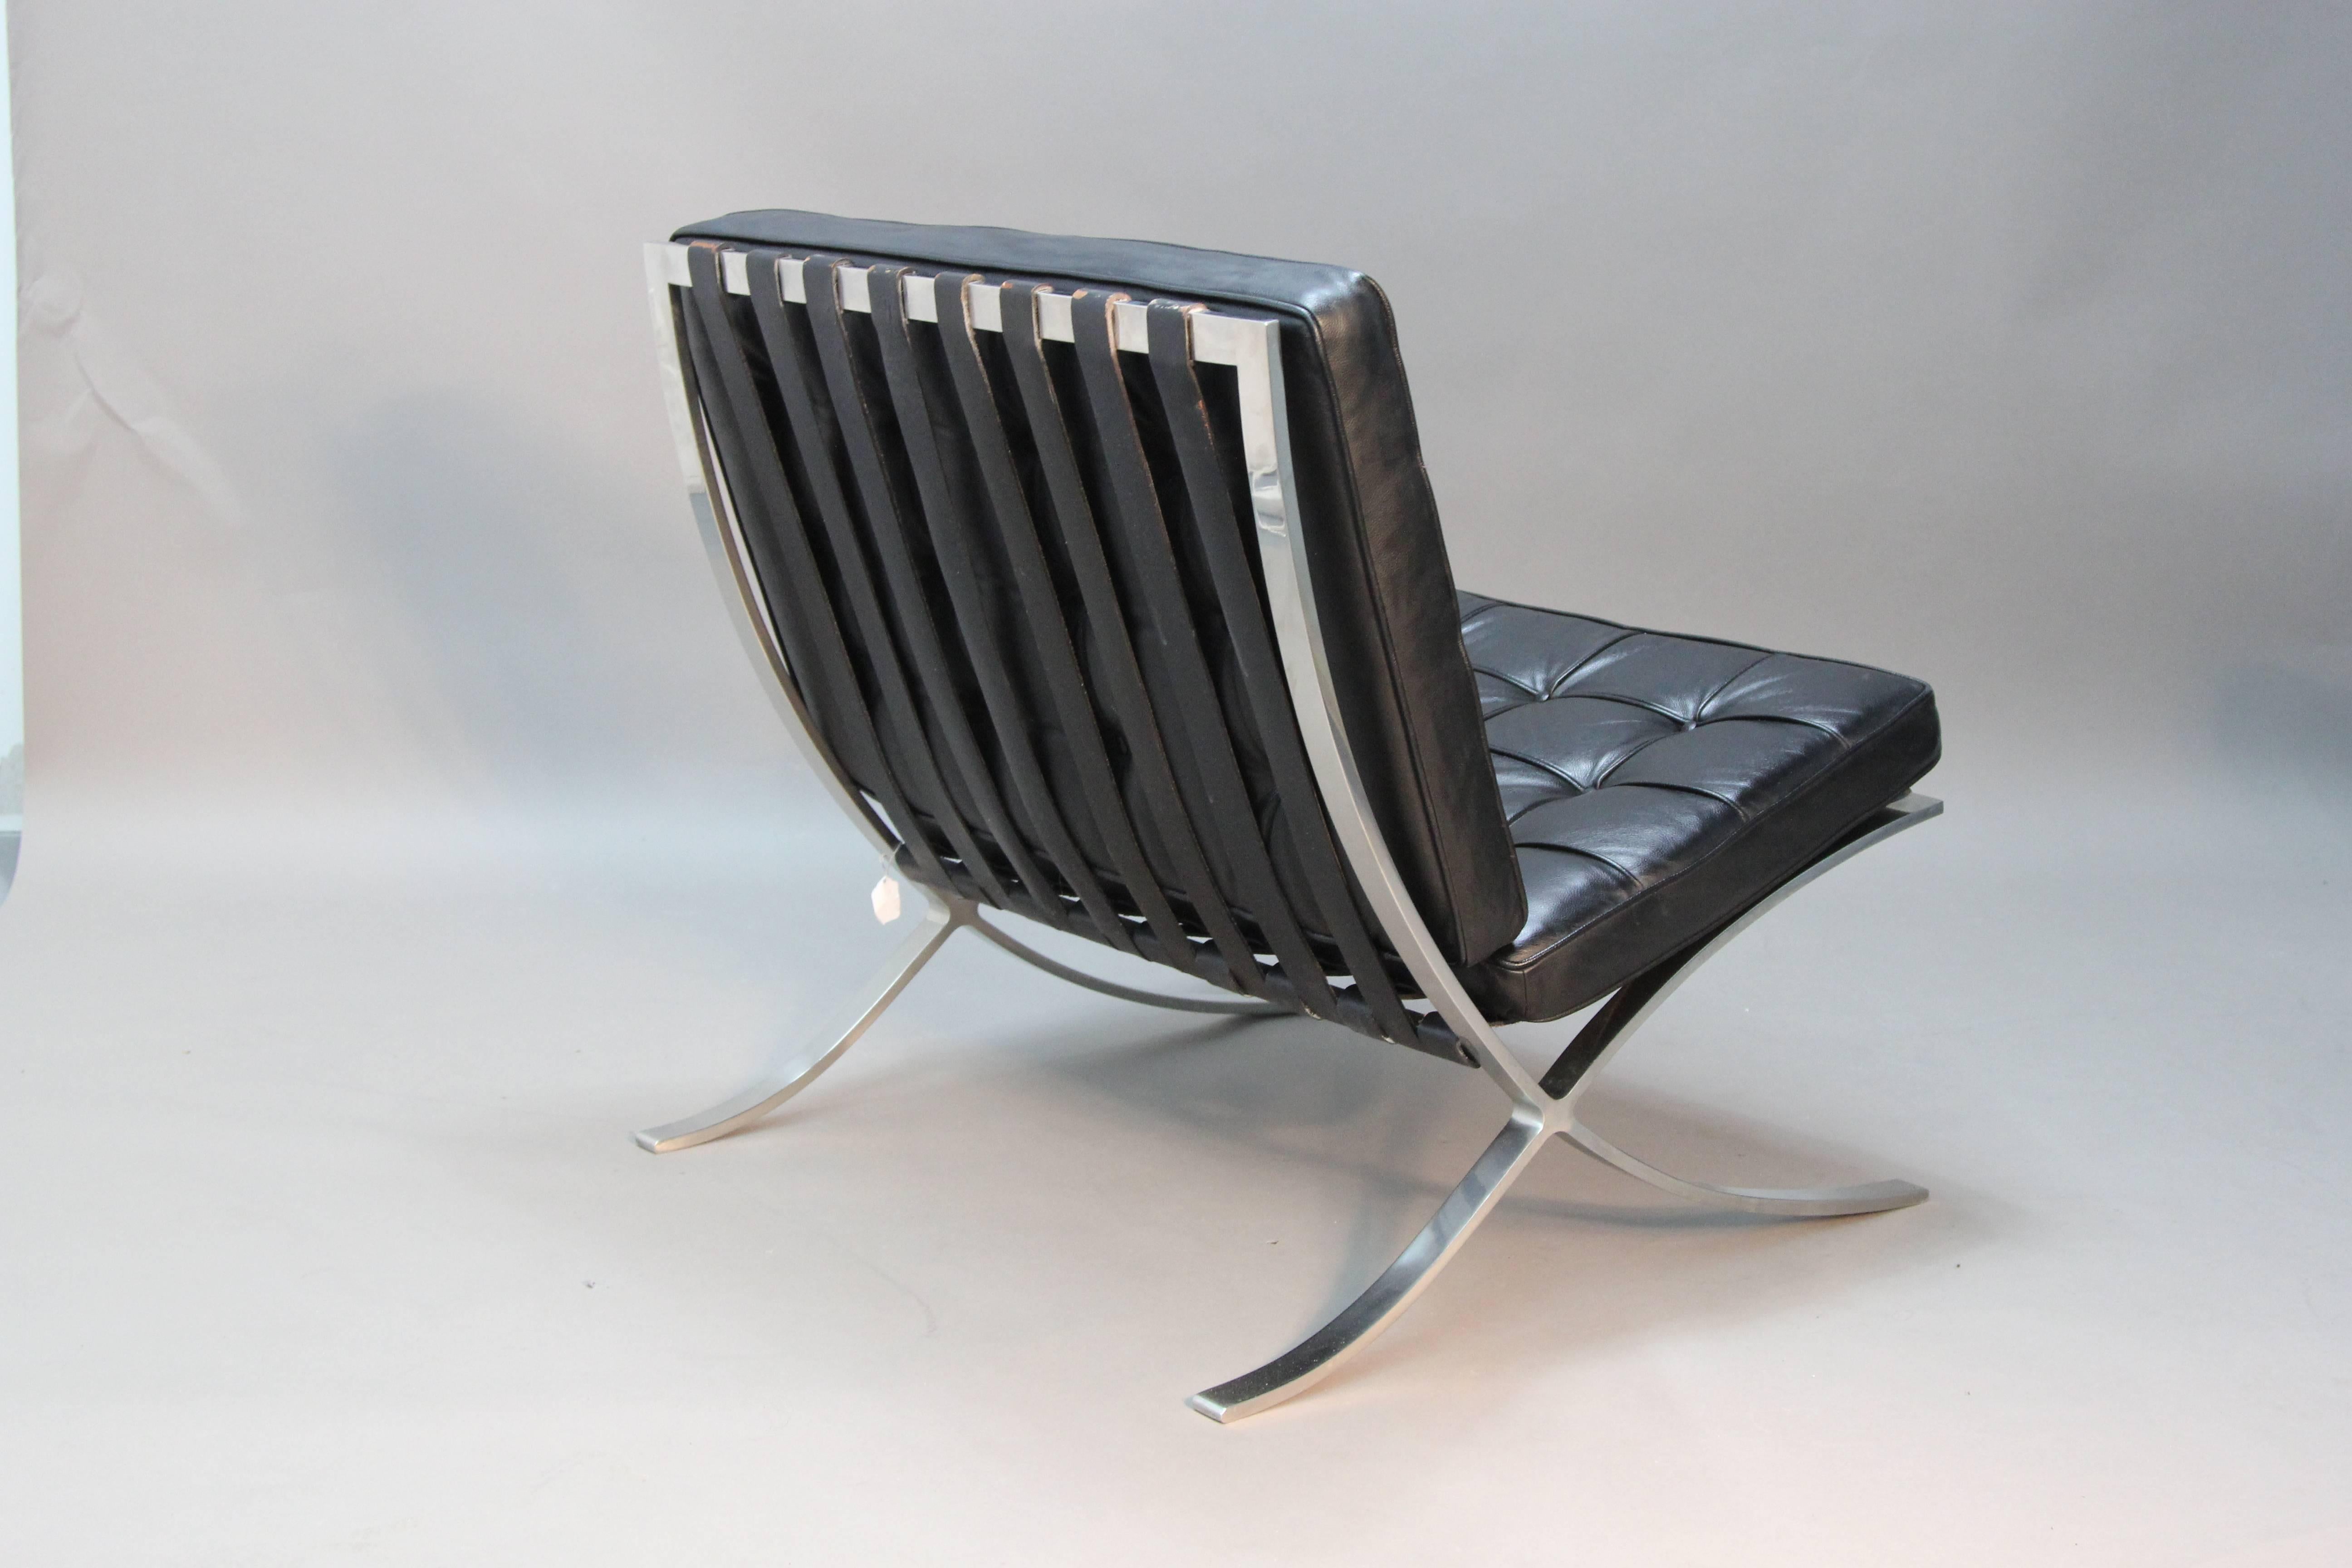 Vintage Barcelona Chairs by Mies Van Der Rohe In Good Condition For Sale In Bridport, CT